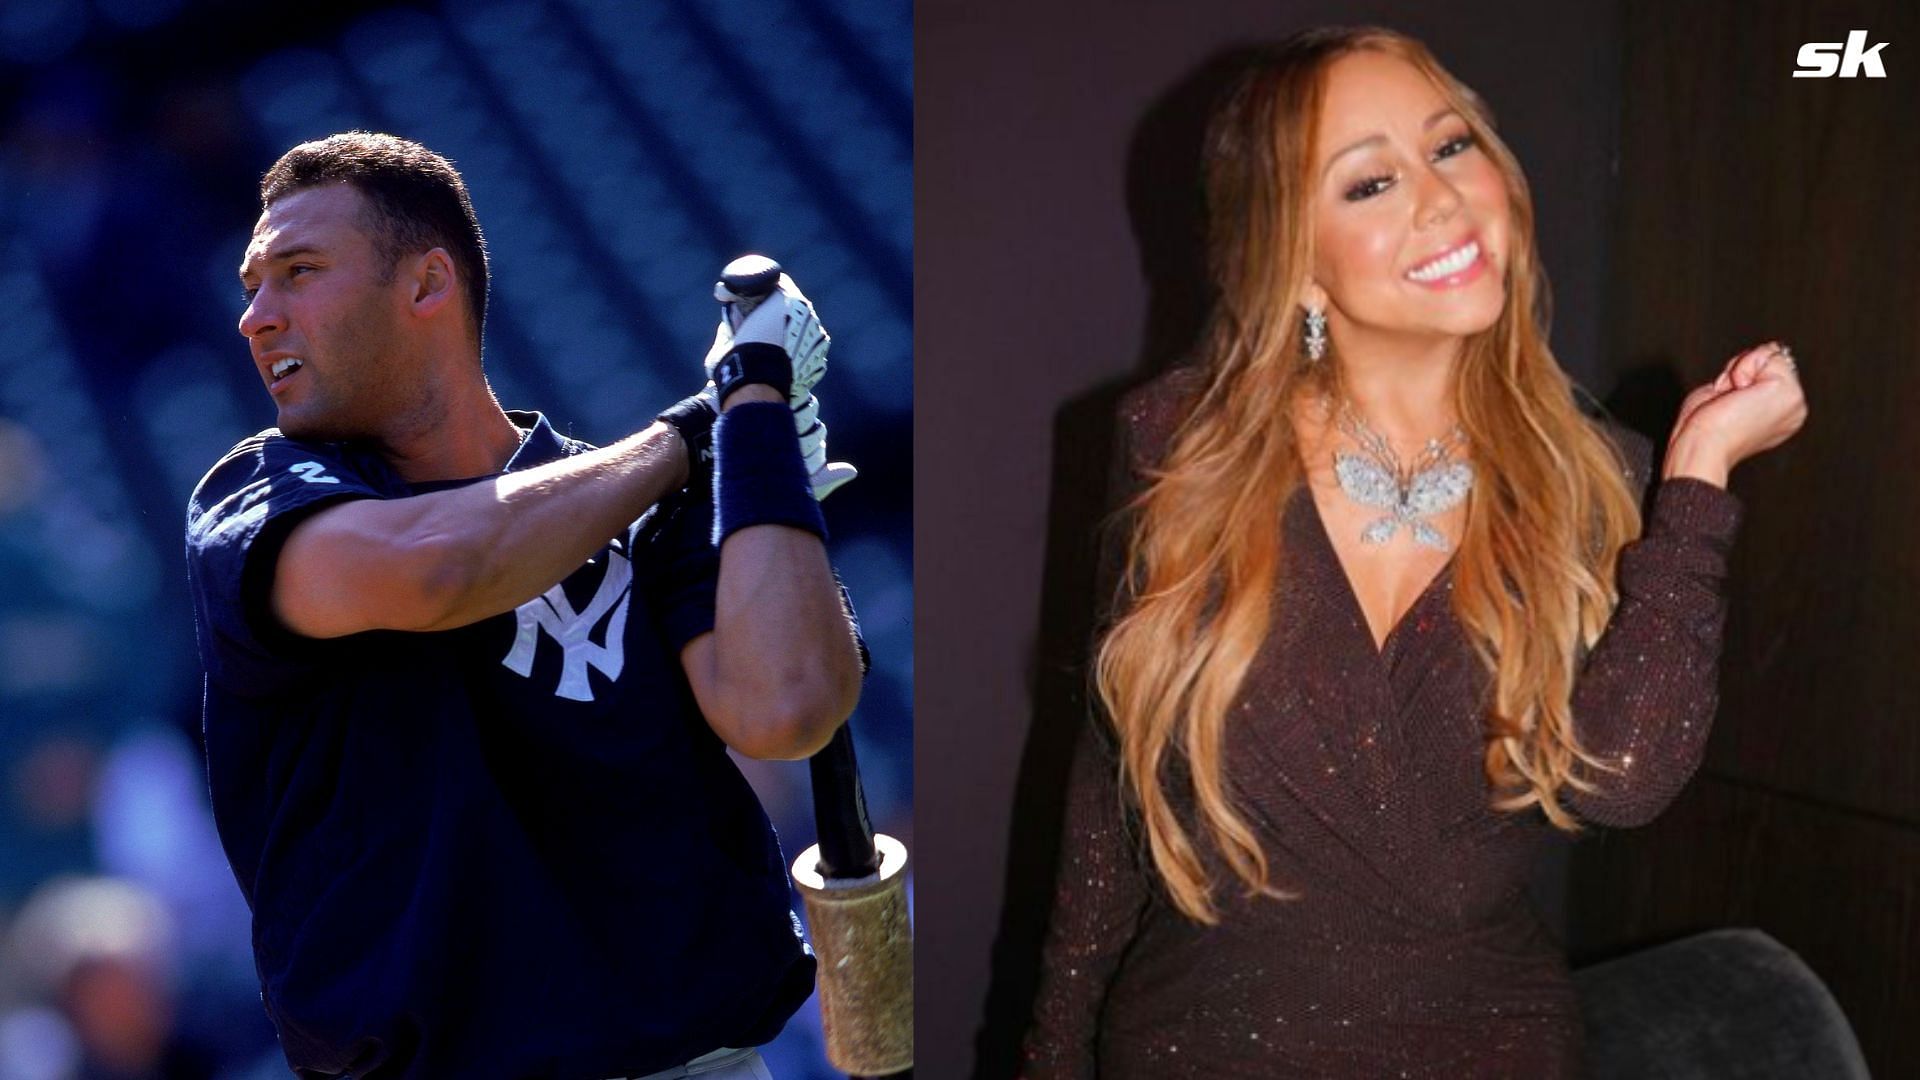 Mariah Carey claims Derek Jeter was the second man she ever had sex with in  affair during her marriage to Tommy Mottola